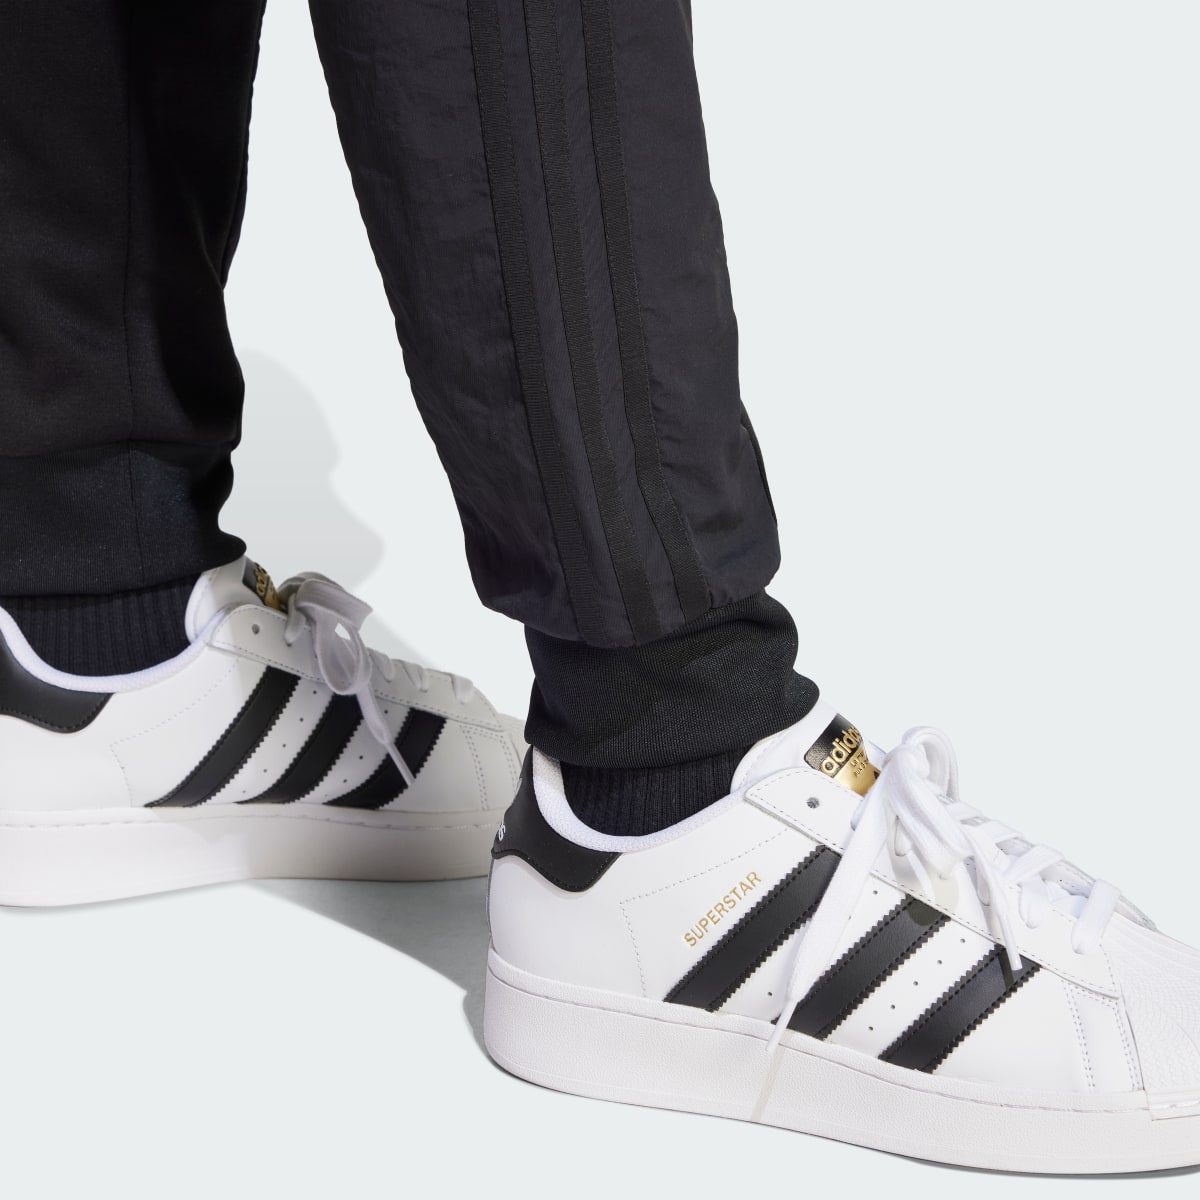 Adidas Adicolor Re-Pro SST Material Mix Track Pants. 6